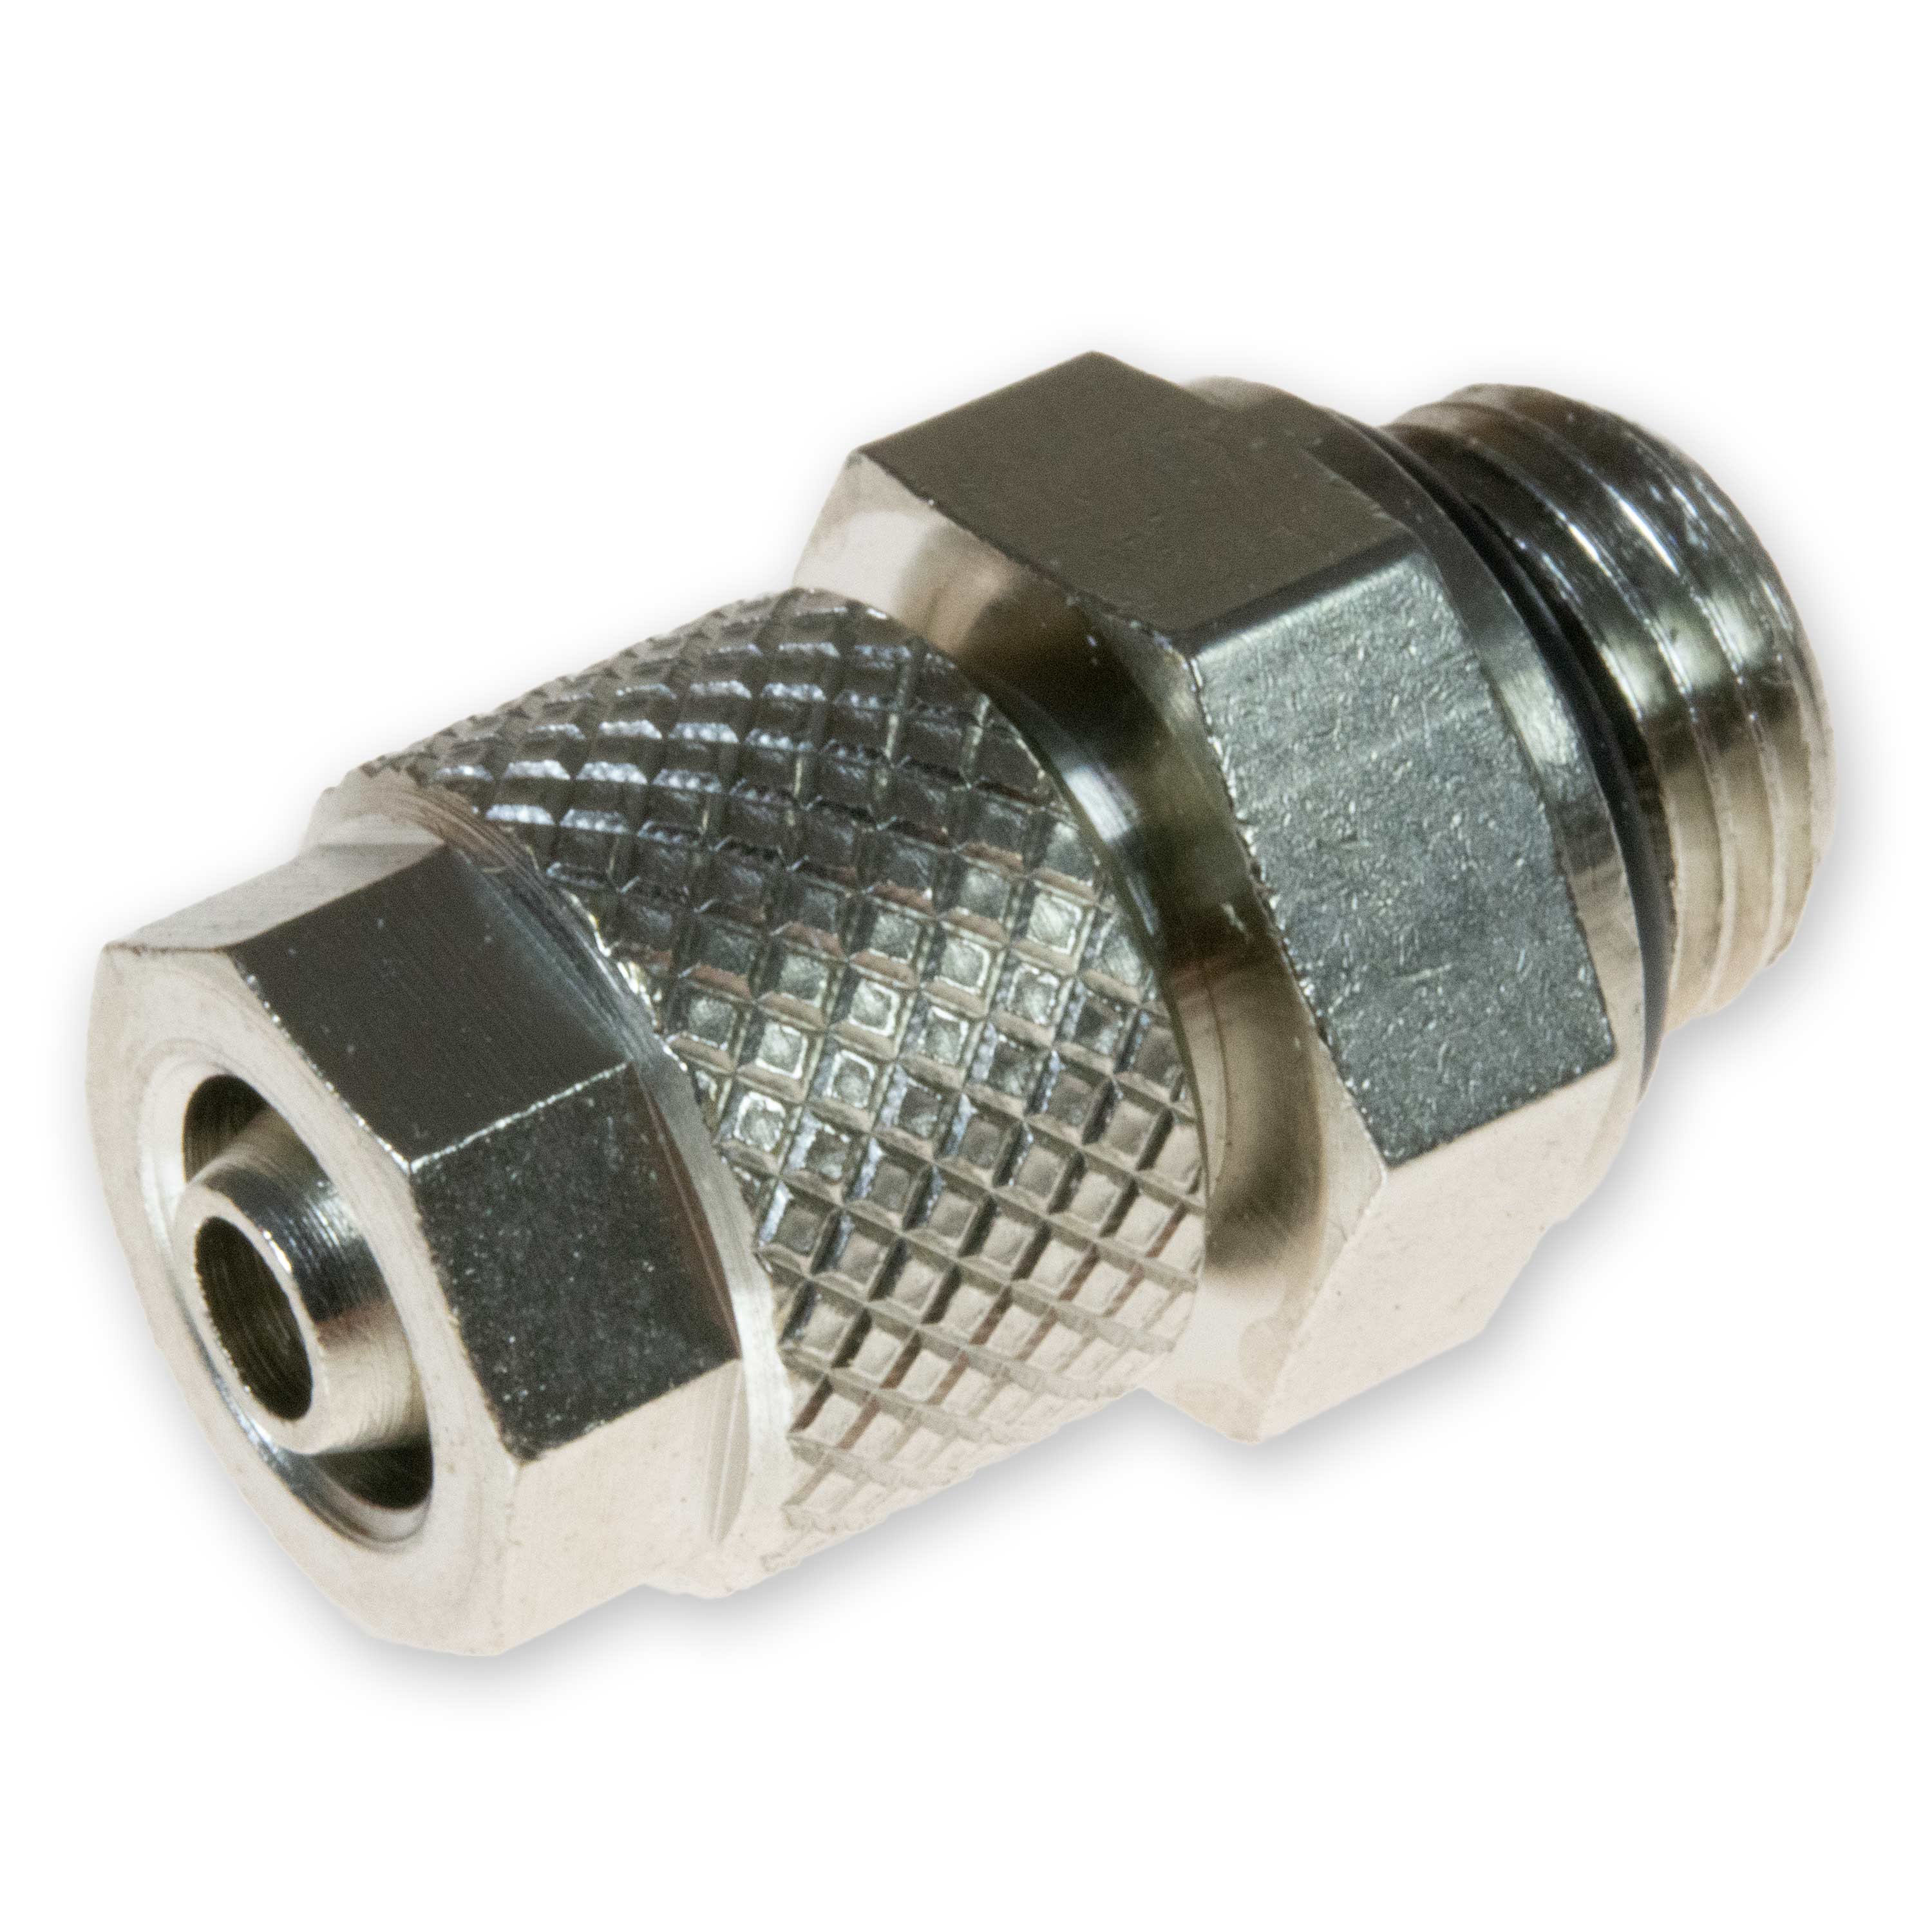 Hose connection 1/8" × 6/4 nickel-plated brass